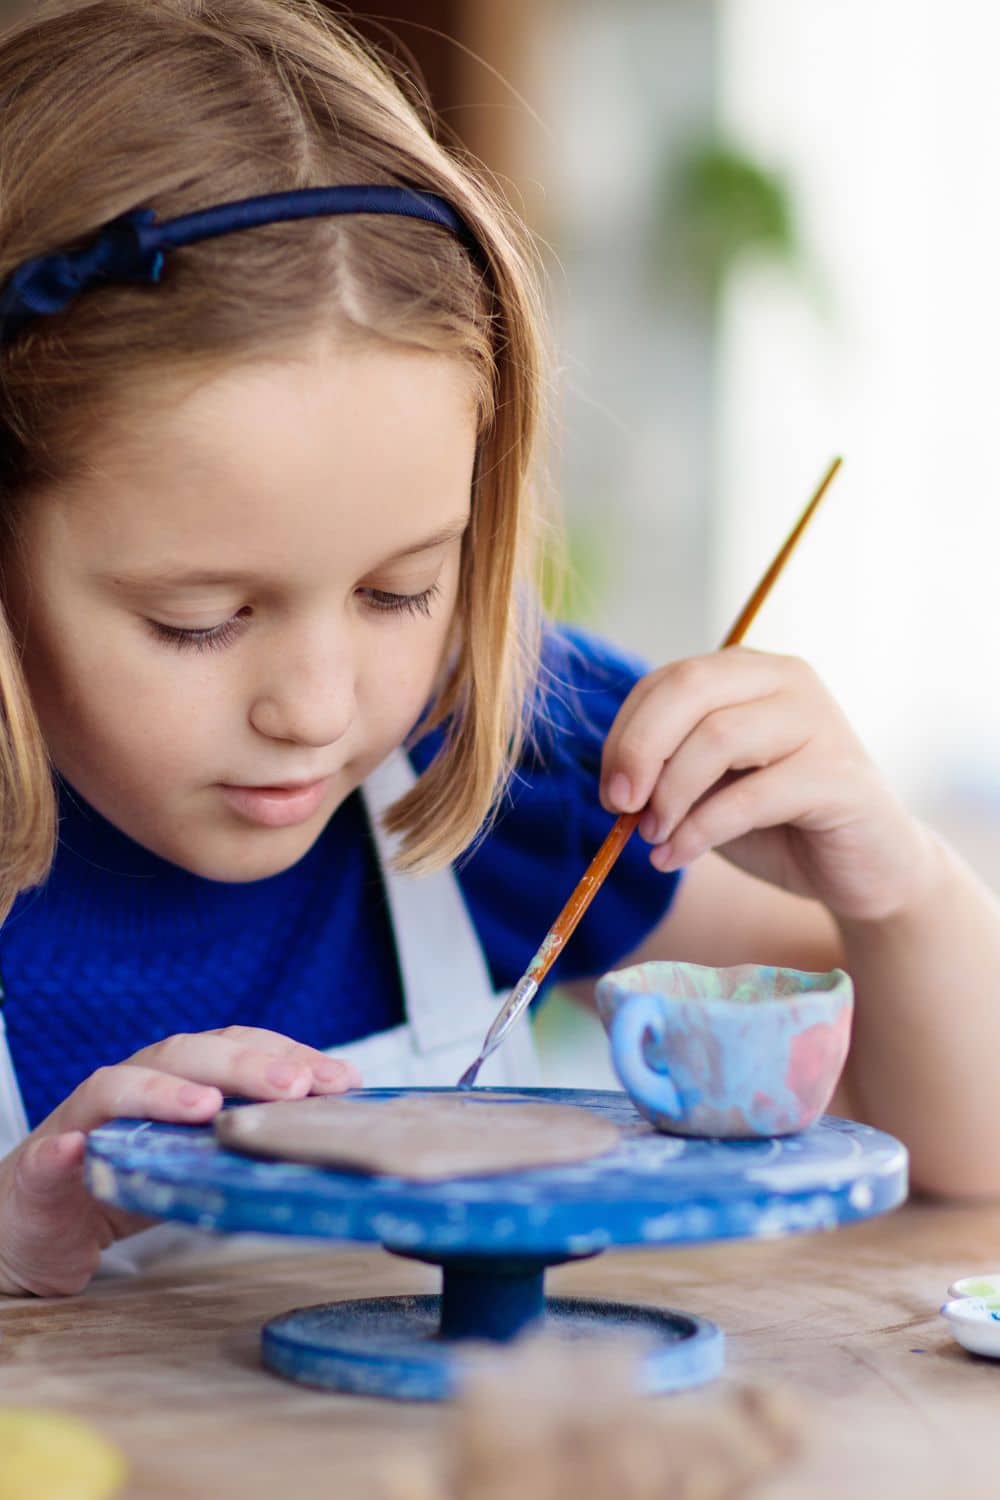 How to Encourage Artistic Development in Kids